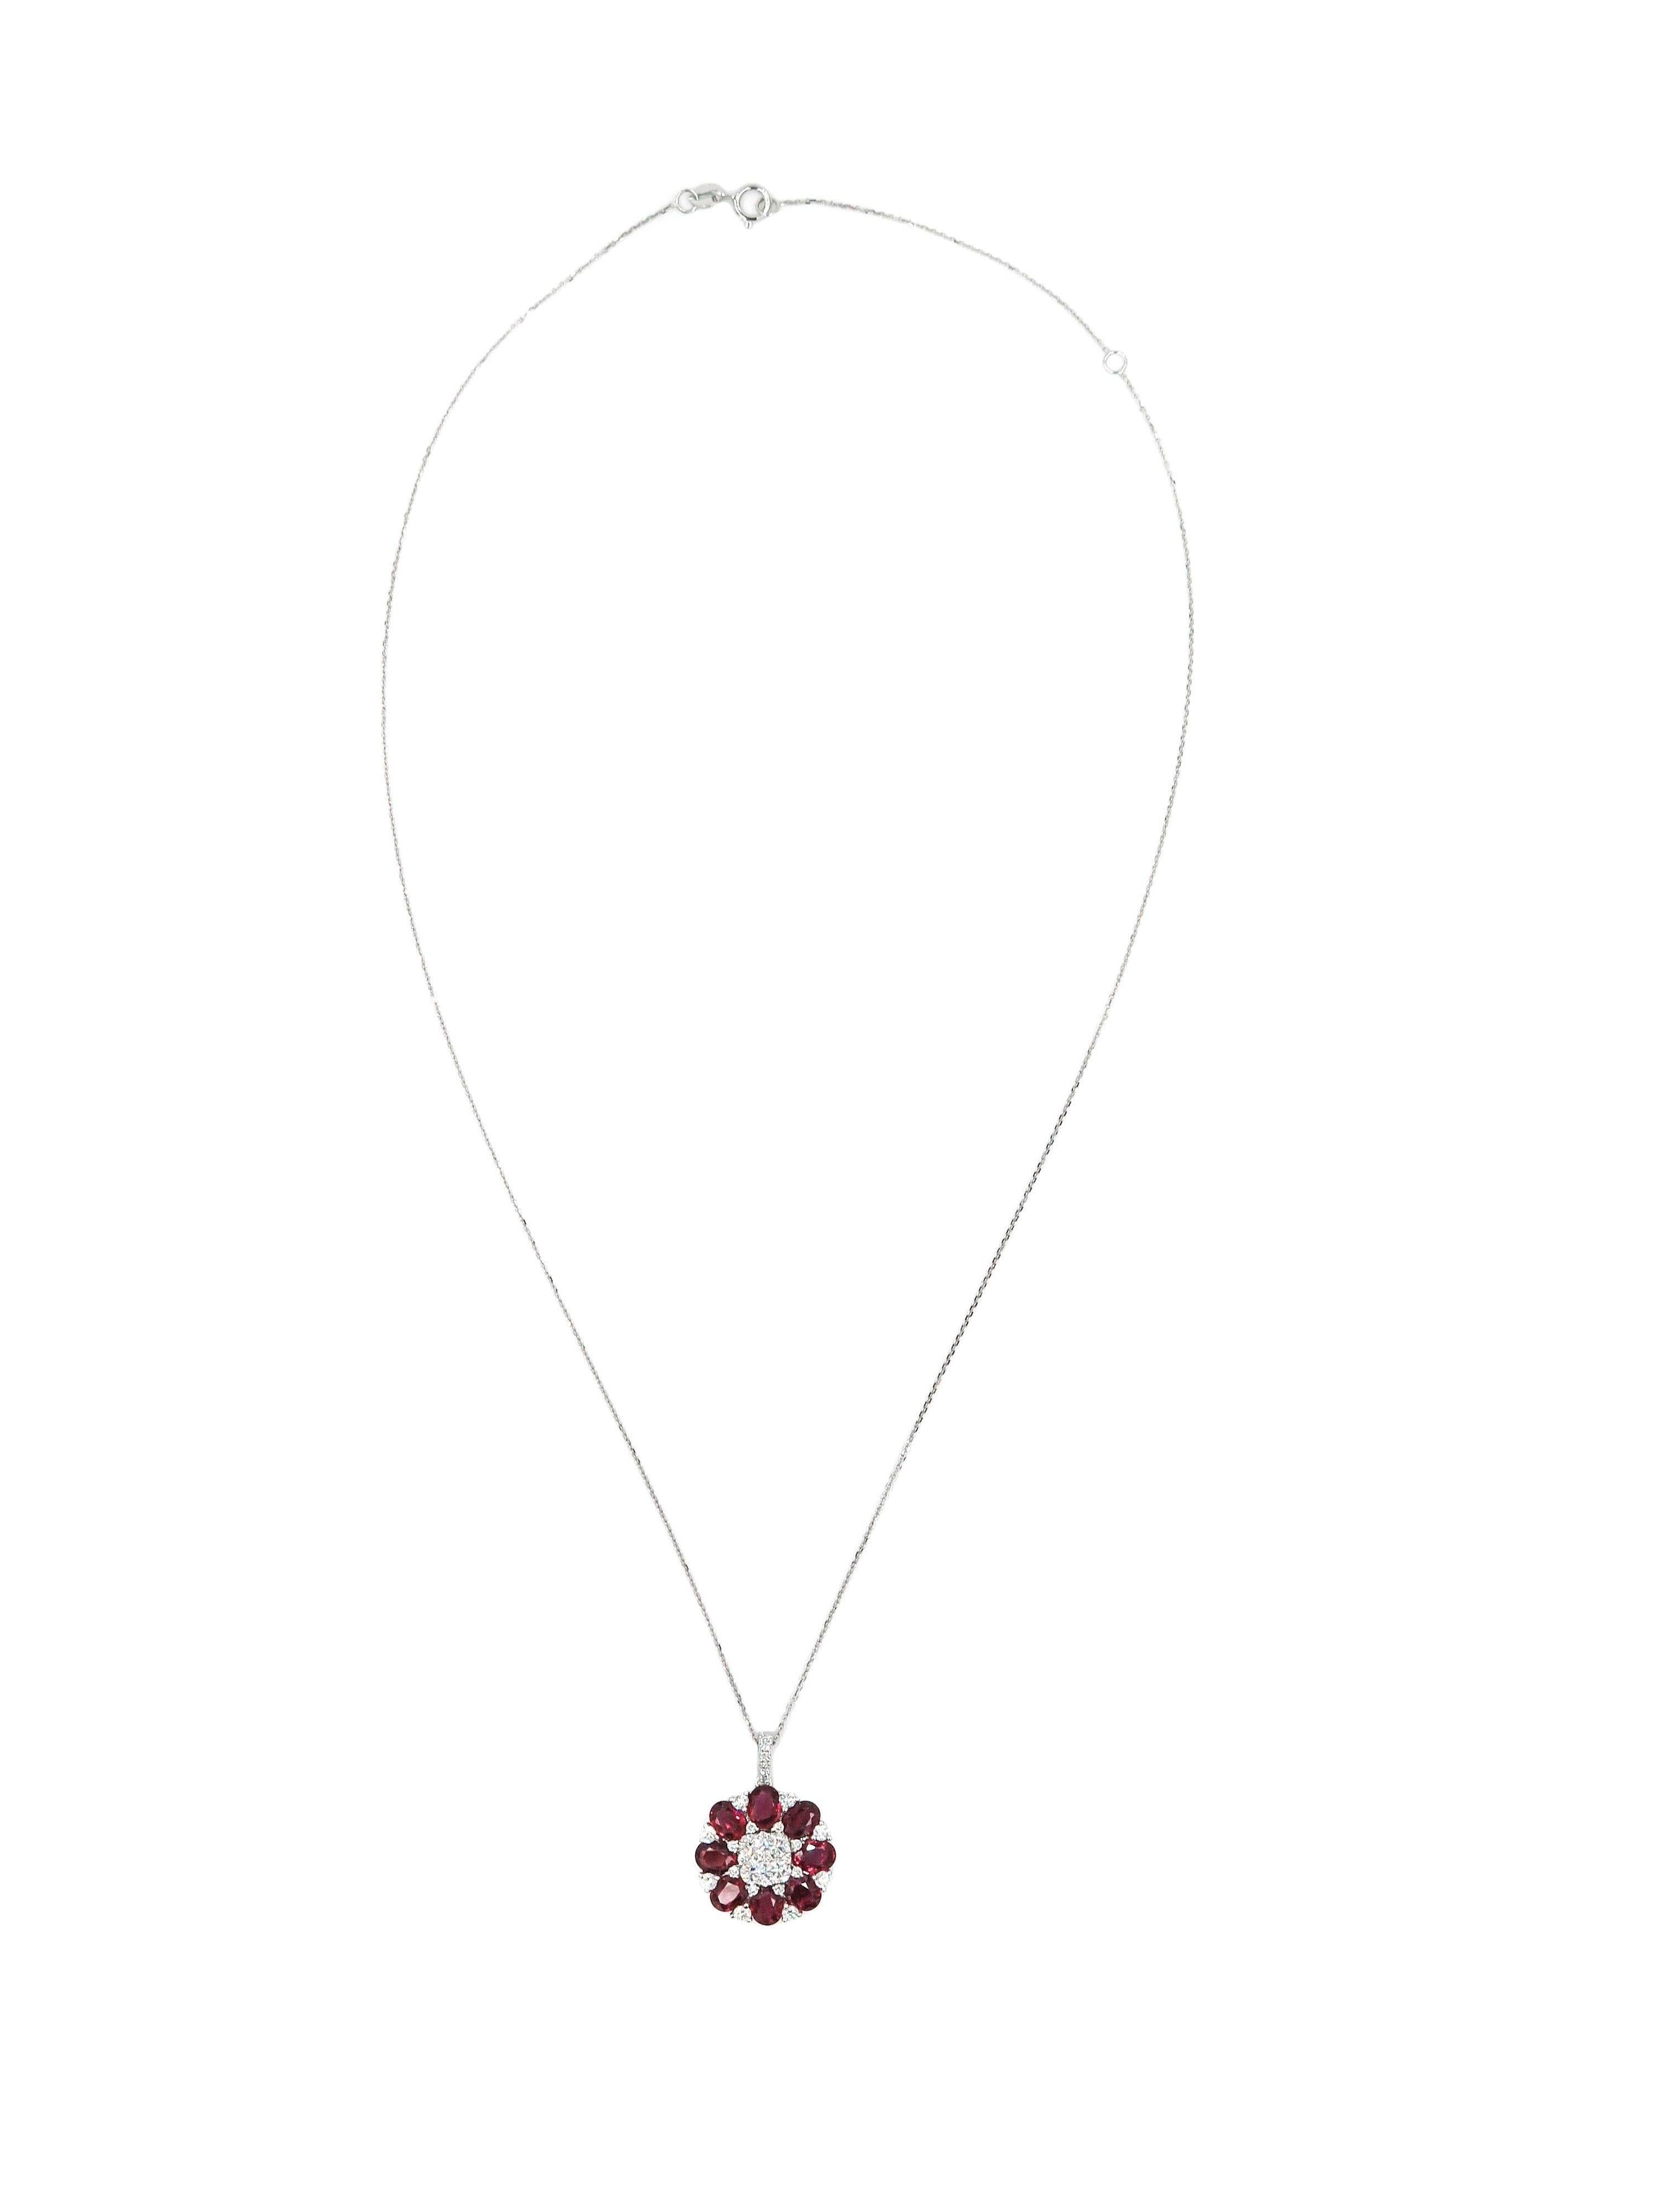 When words are not enough... colors and shapes can speak for themselves. 
Eight oval cut rubies, enriched by 31 round diamonds bloom into this beautiful pendant.  
Creatively crafted in 18 karat white gold, with 2.86 carats of ruby and 0.77 carats